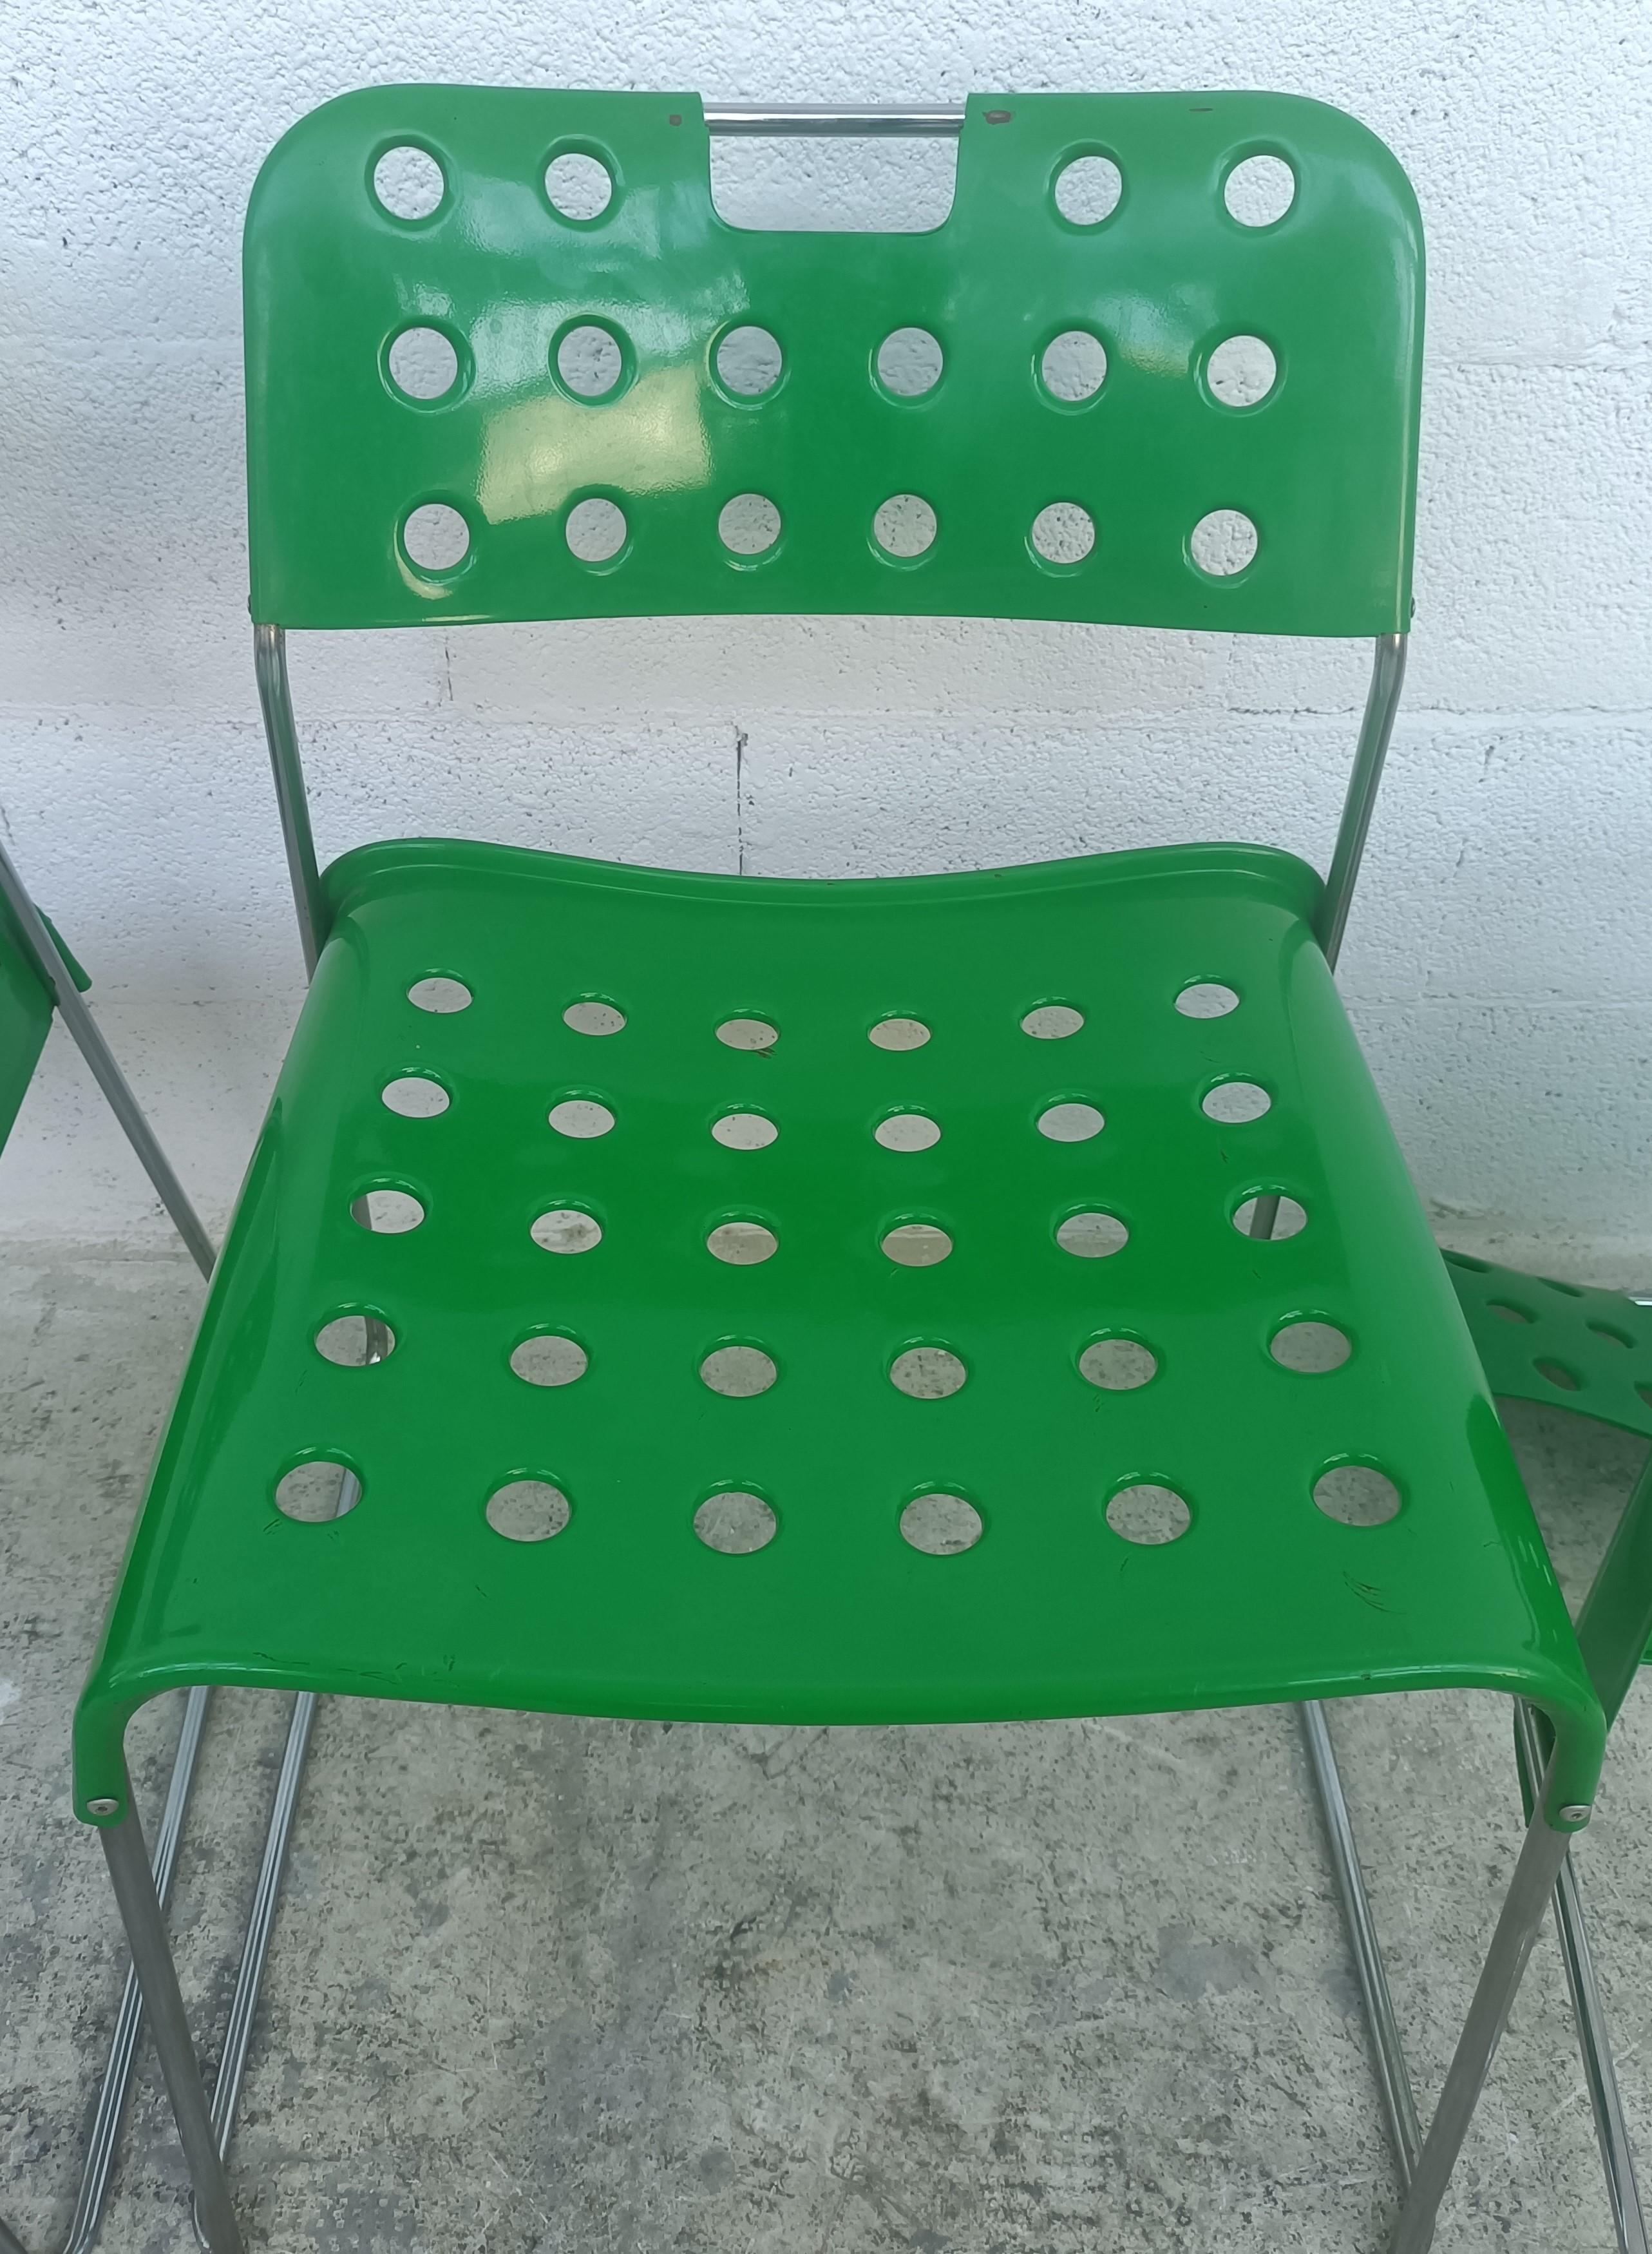 4 Green Omkstak Stackable Chairs by Rodney Kinsman for Bieffeplast 70s For Sale 3